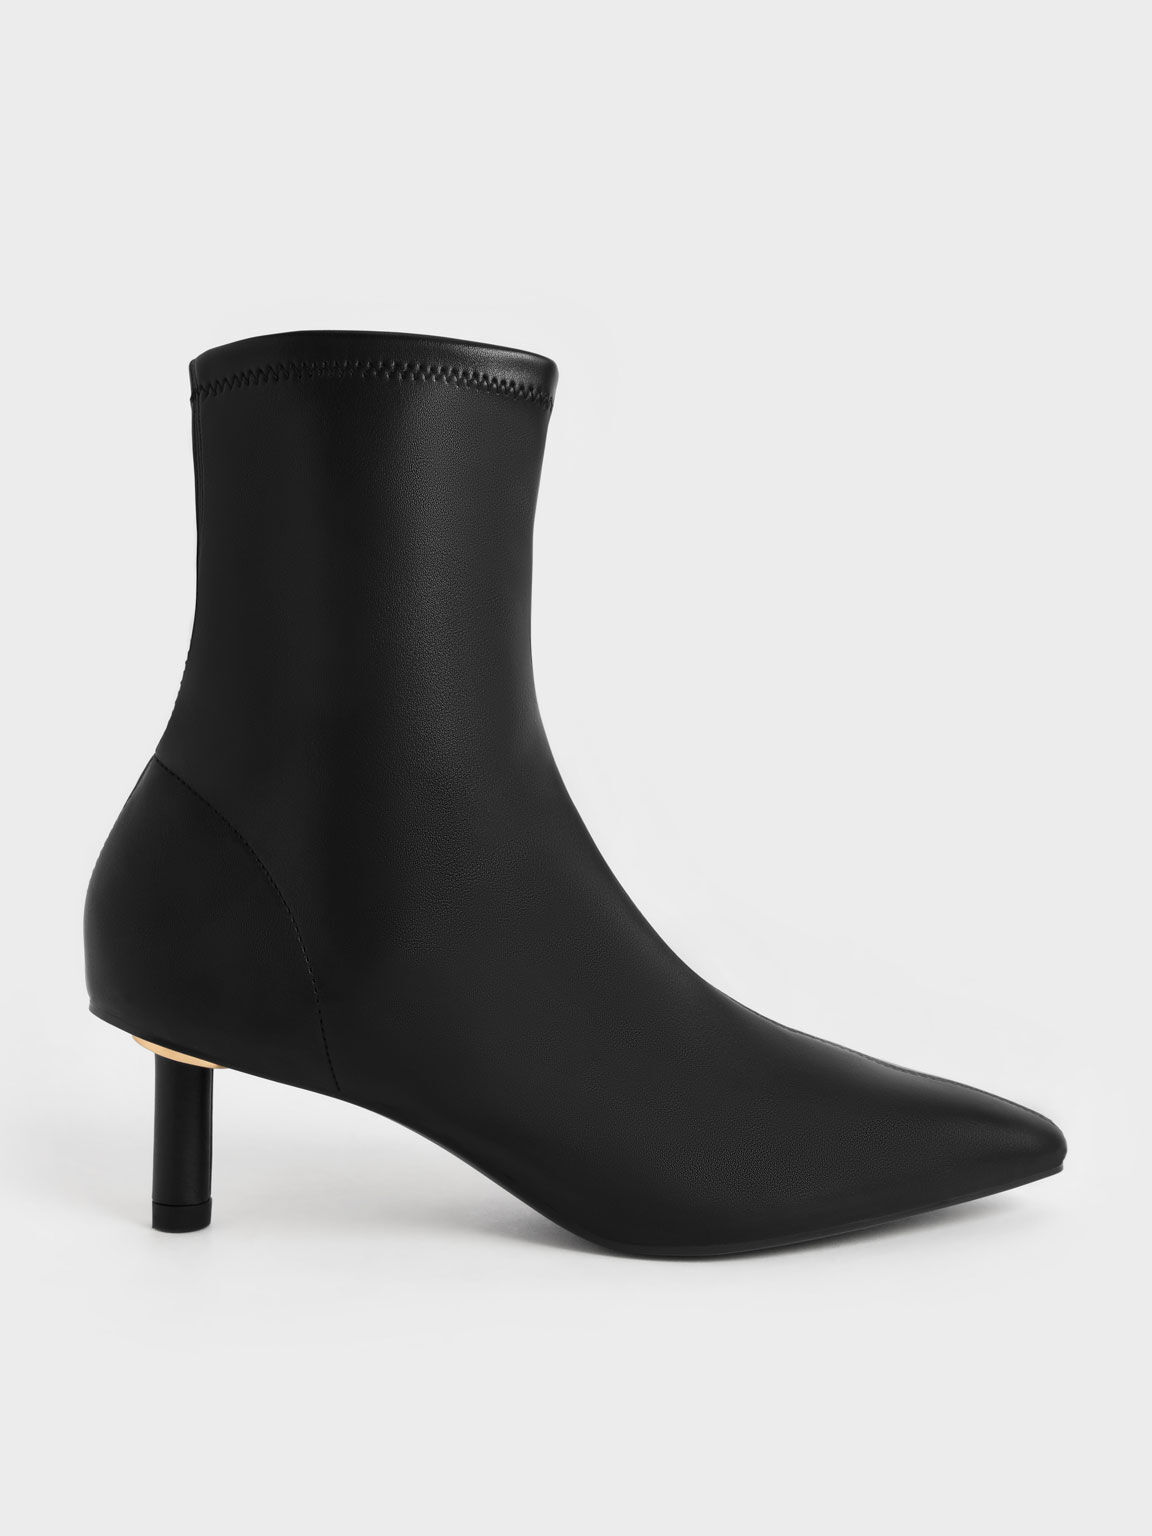 Cylindrical Heel Ankle Boots, Black, hi-res